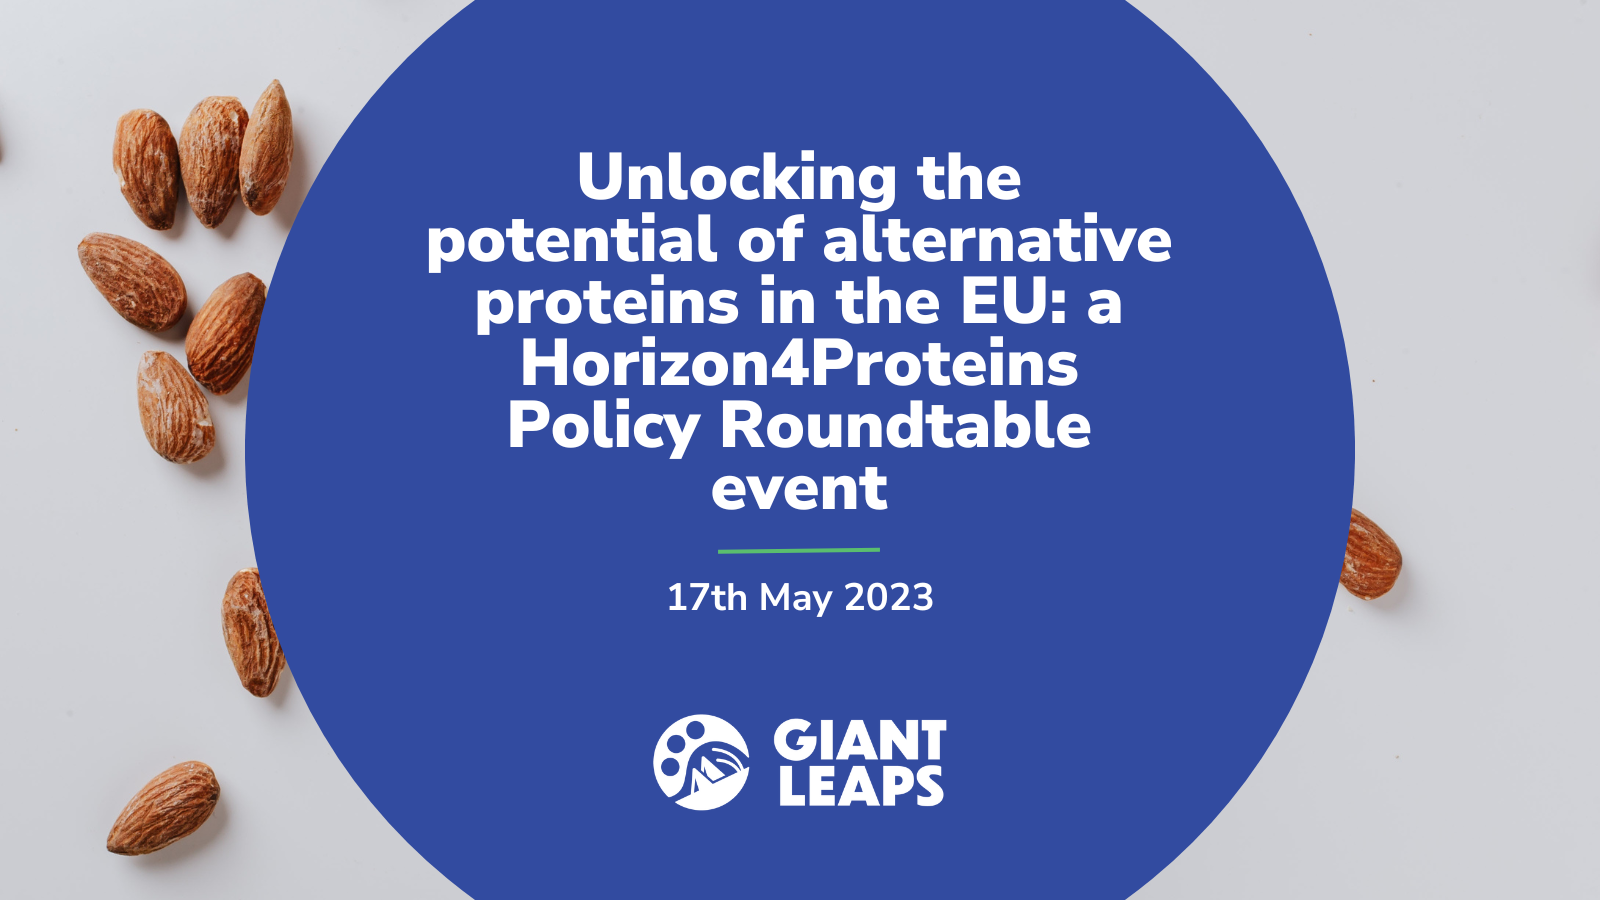 Unlocking the potential of alternative proteins in the EU: a Horizon4Proteins Policy Roundtable event